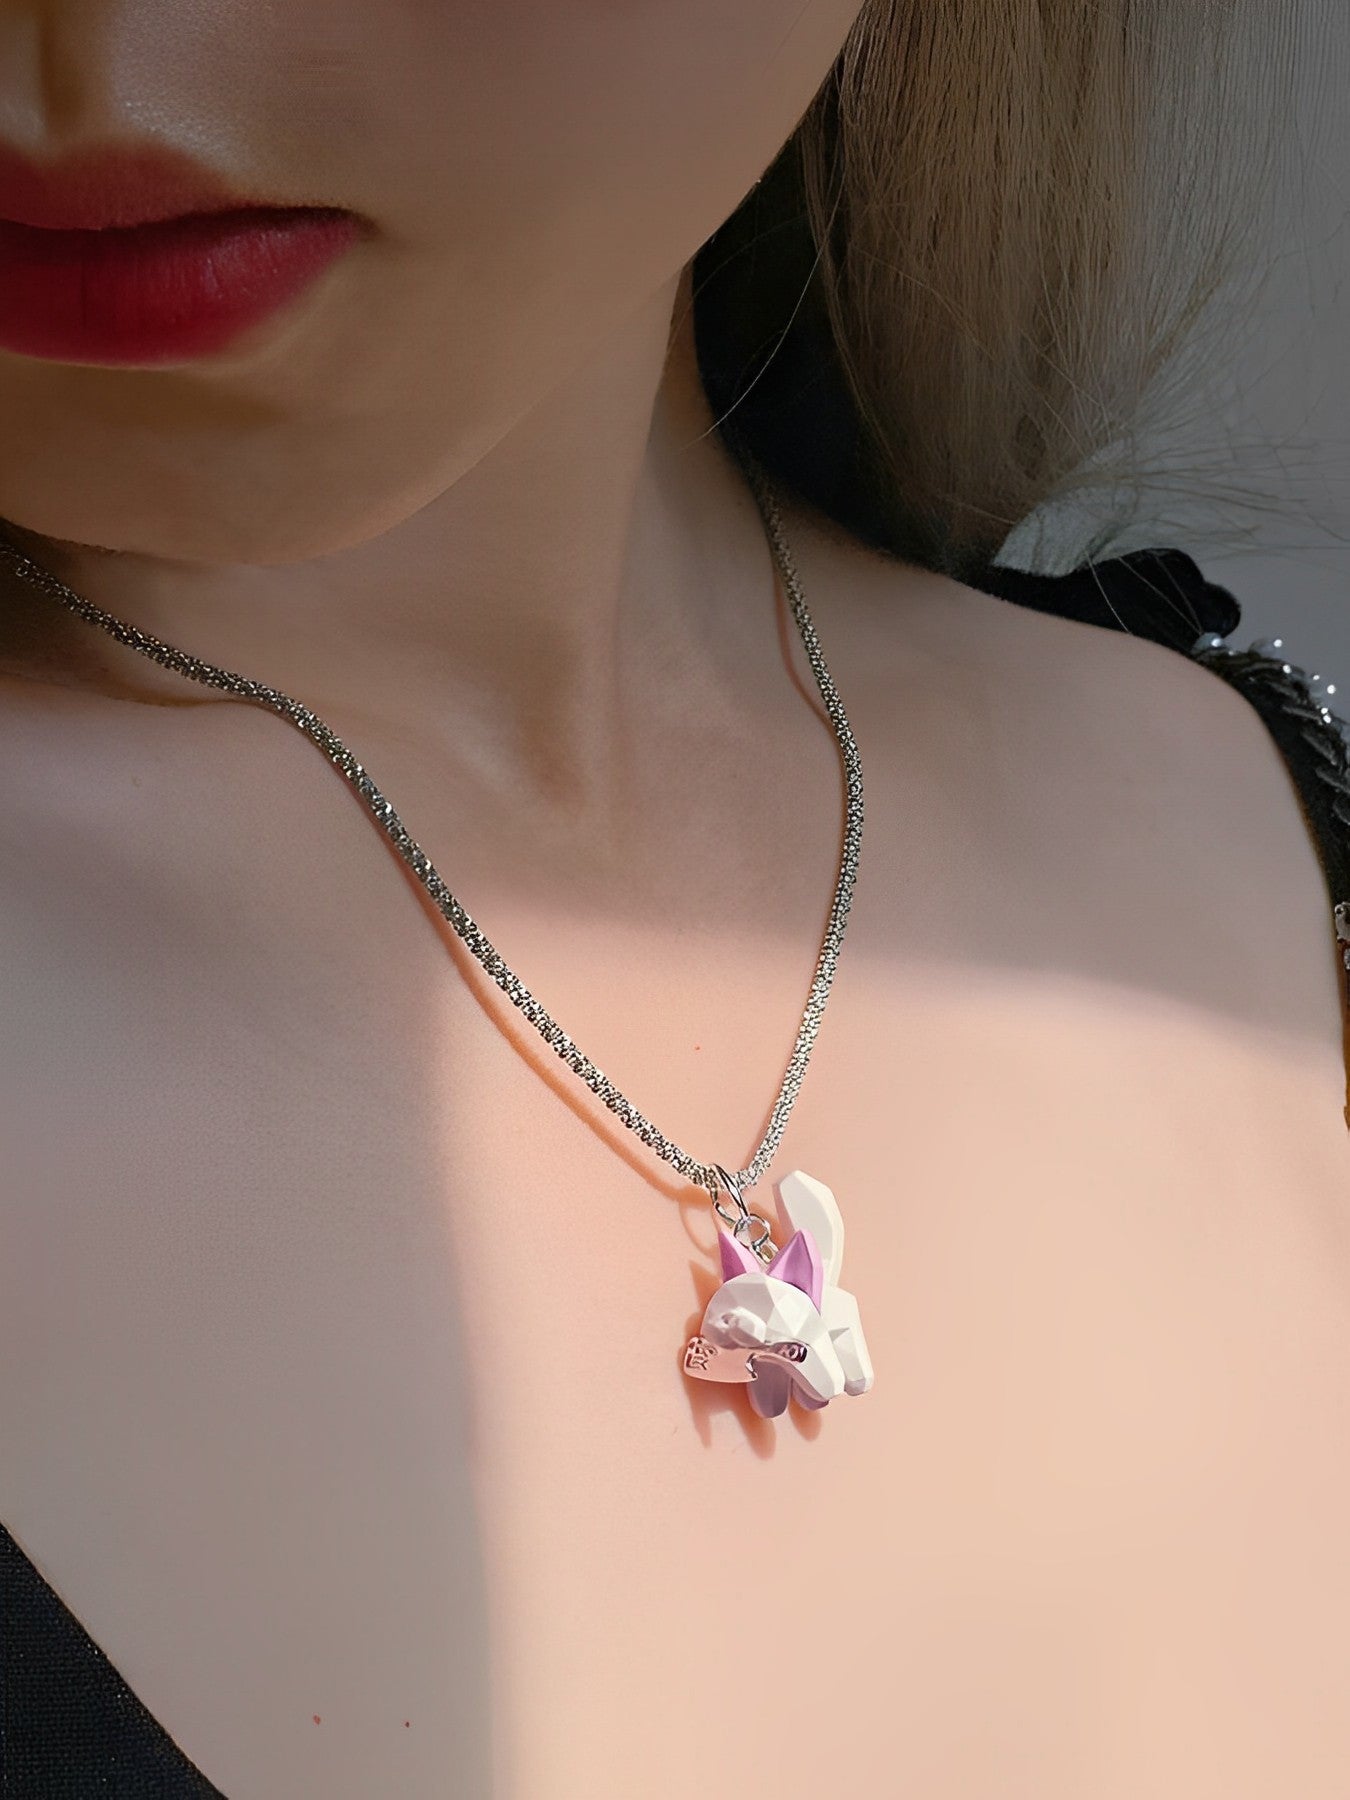 Lucky Cat Polygon Necklace B1437